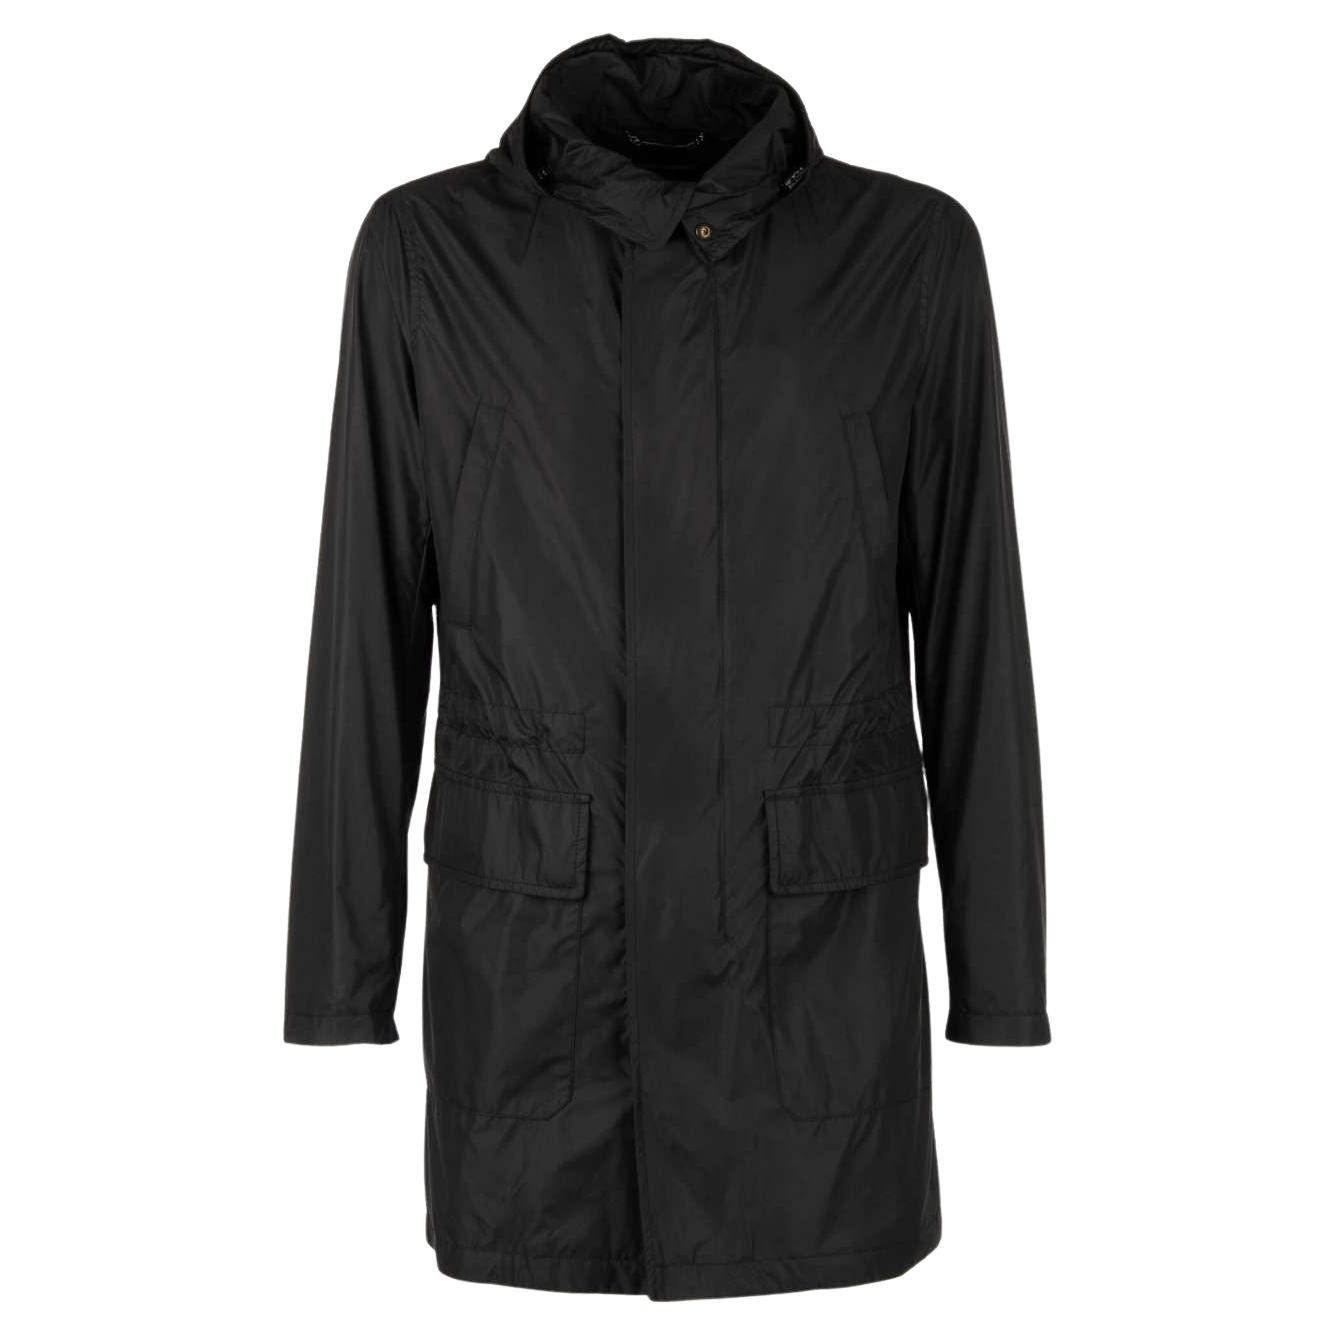 Dolce & Gabbana Classic Rain Parka Jacket with Pockets and Hoody Black 44 For Sale